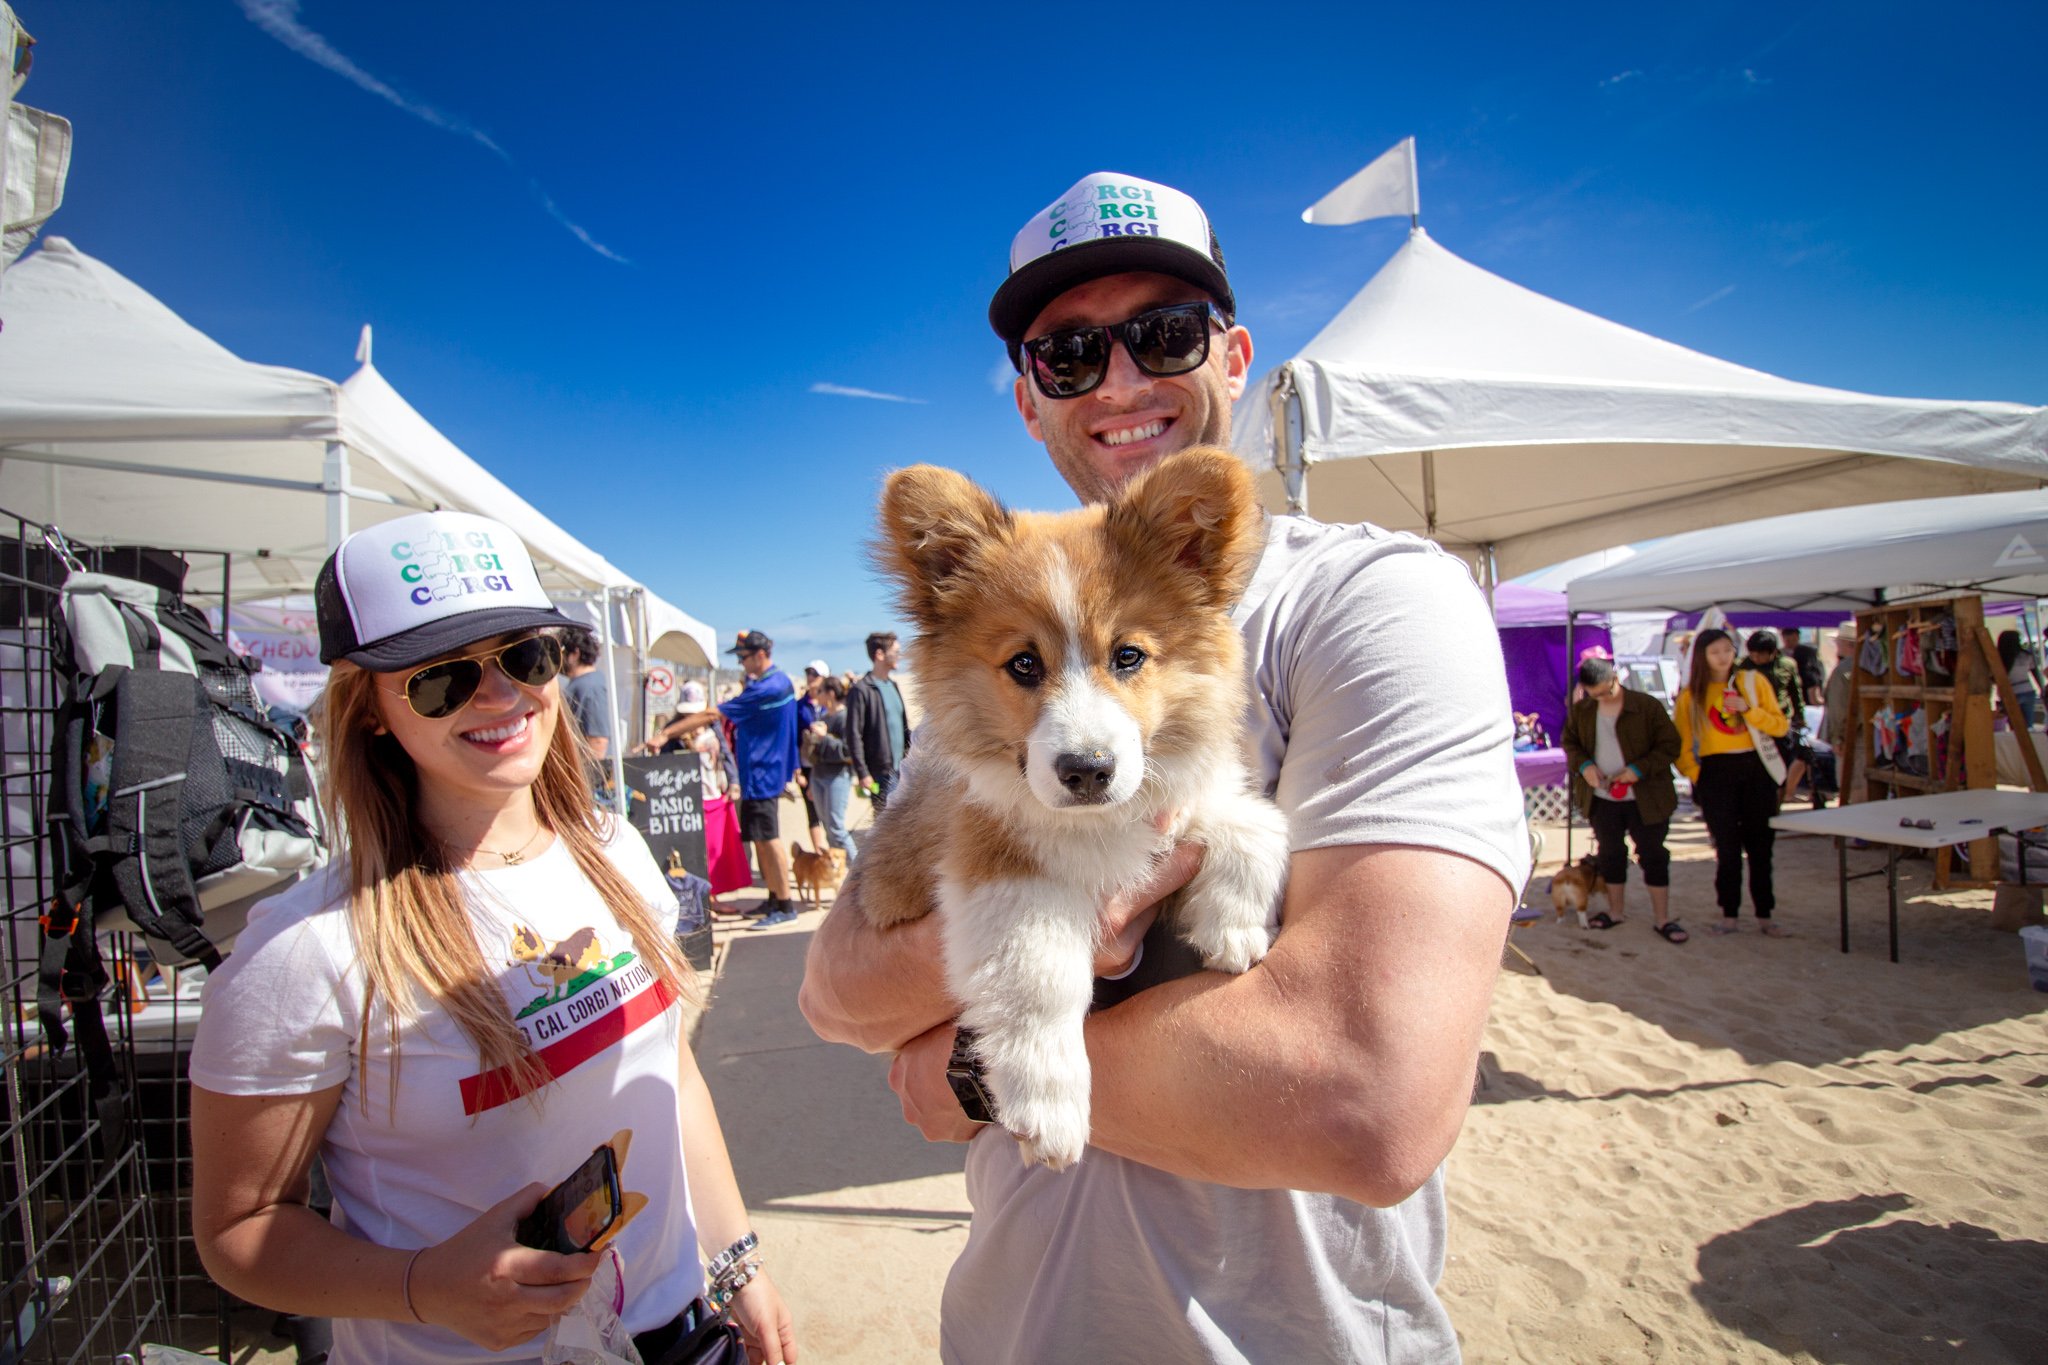 Orange County Pet and Dog Photography - by Steamer Lee - Corgi Beach Day Spring 2019 - Southern Caliornia 67.JPG